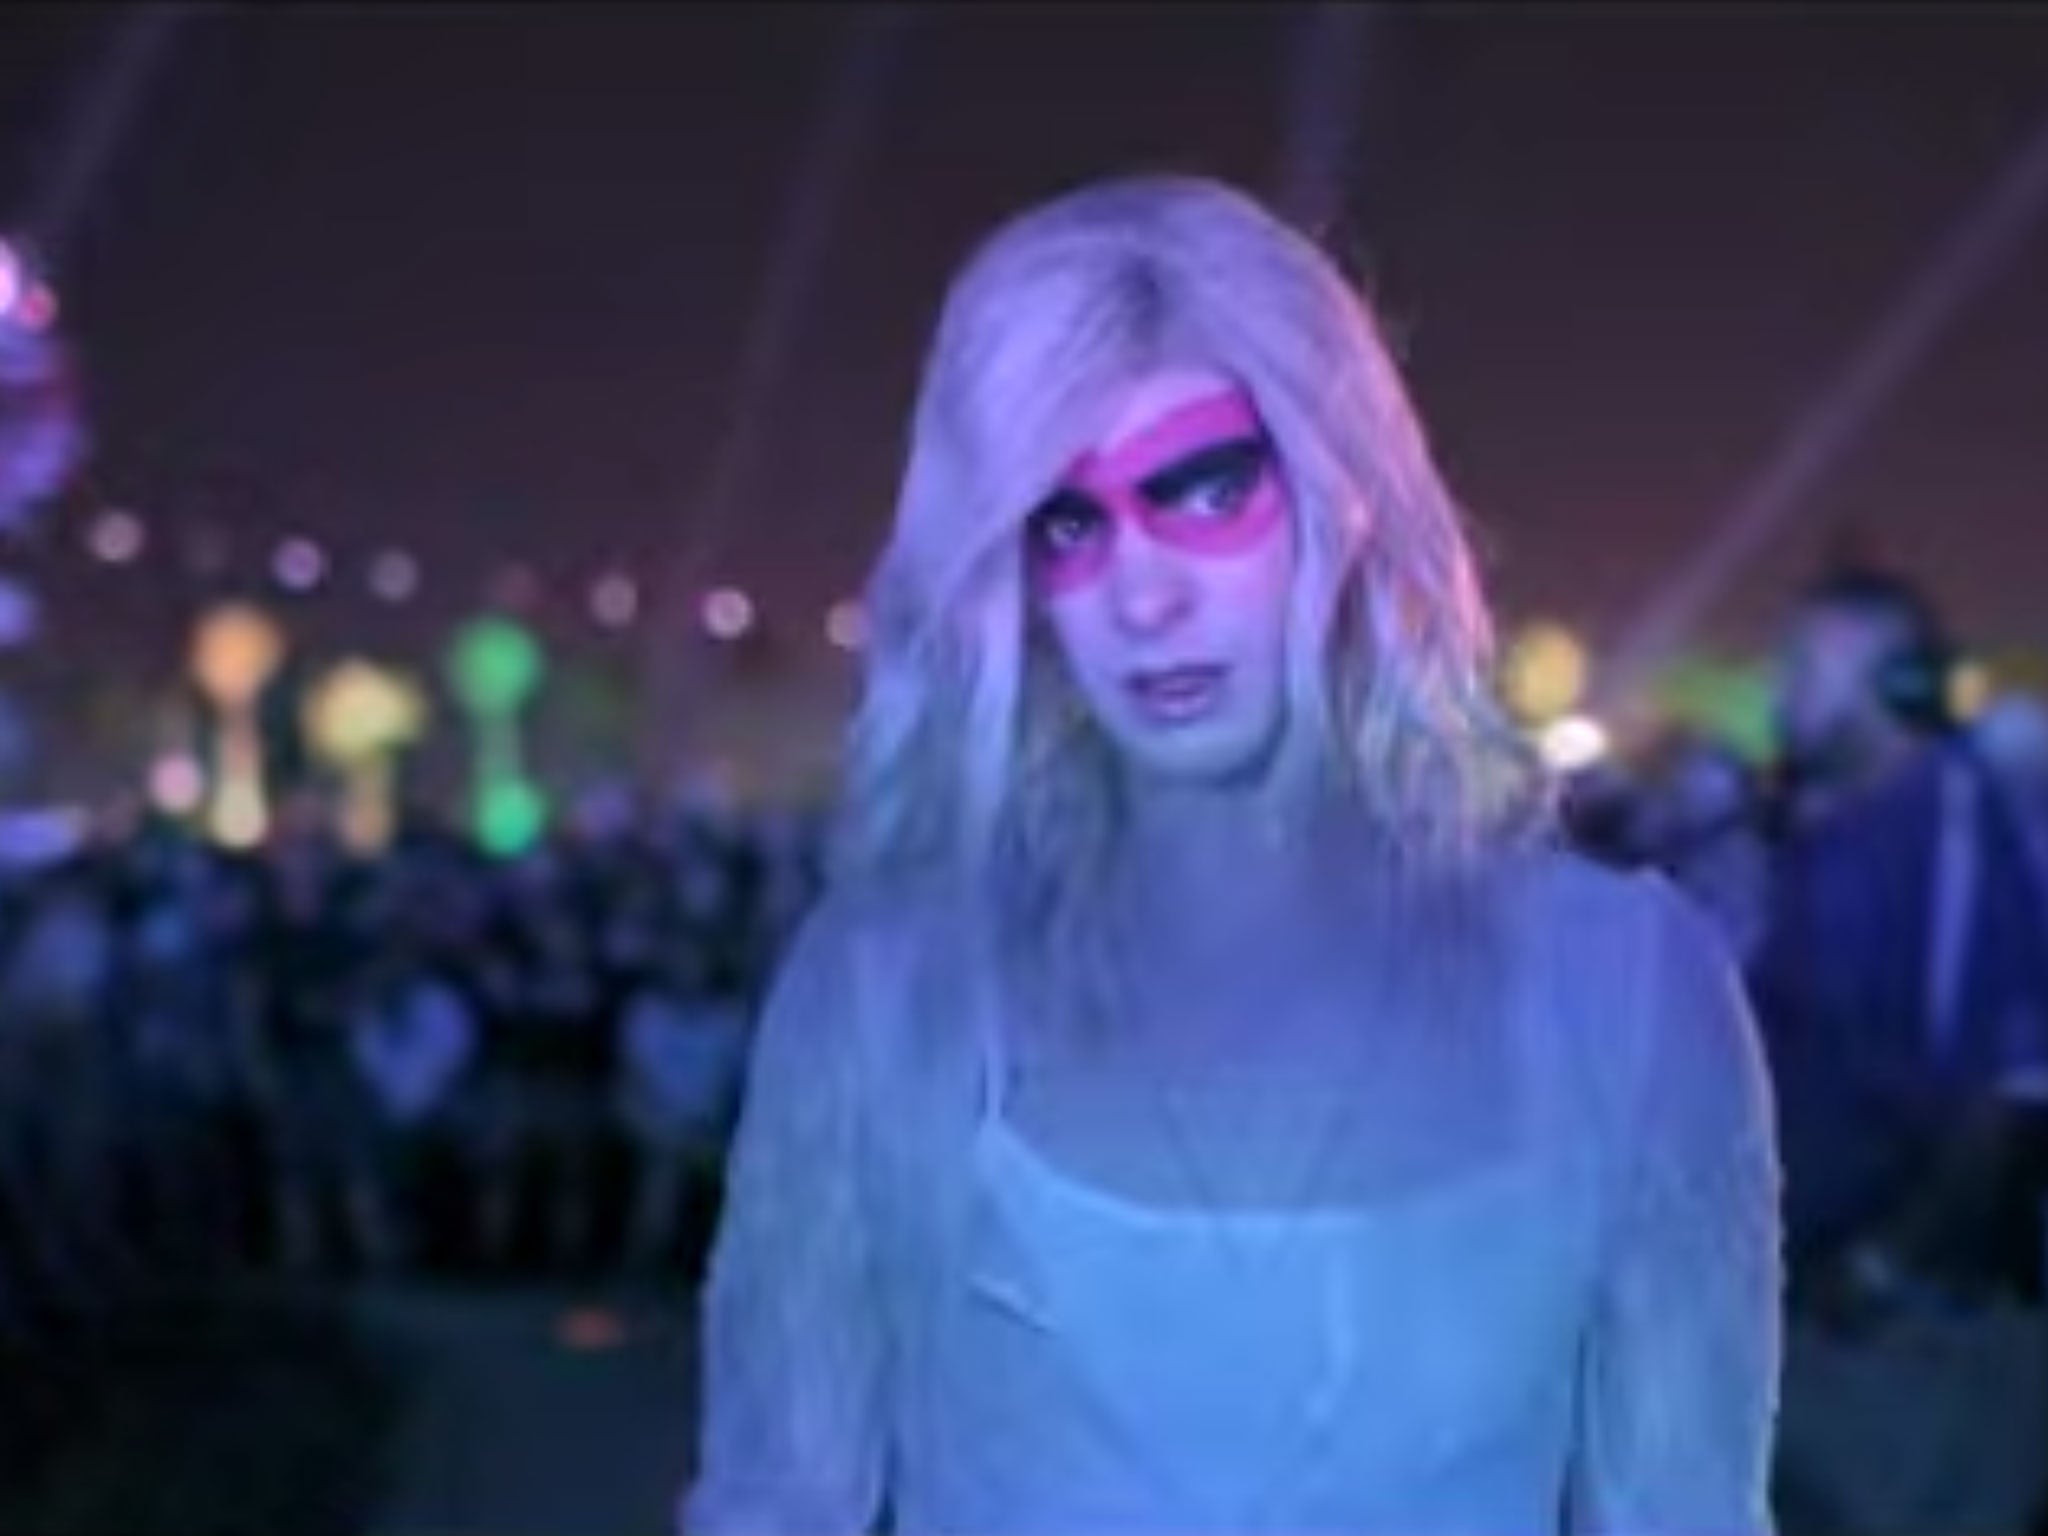 Andrew Garfield appears in drag in Arcade Fire's 'We Exist' music video